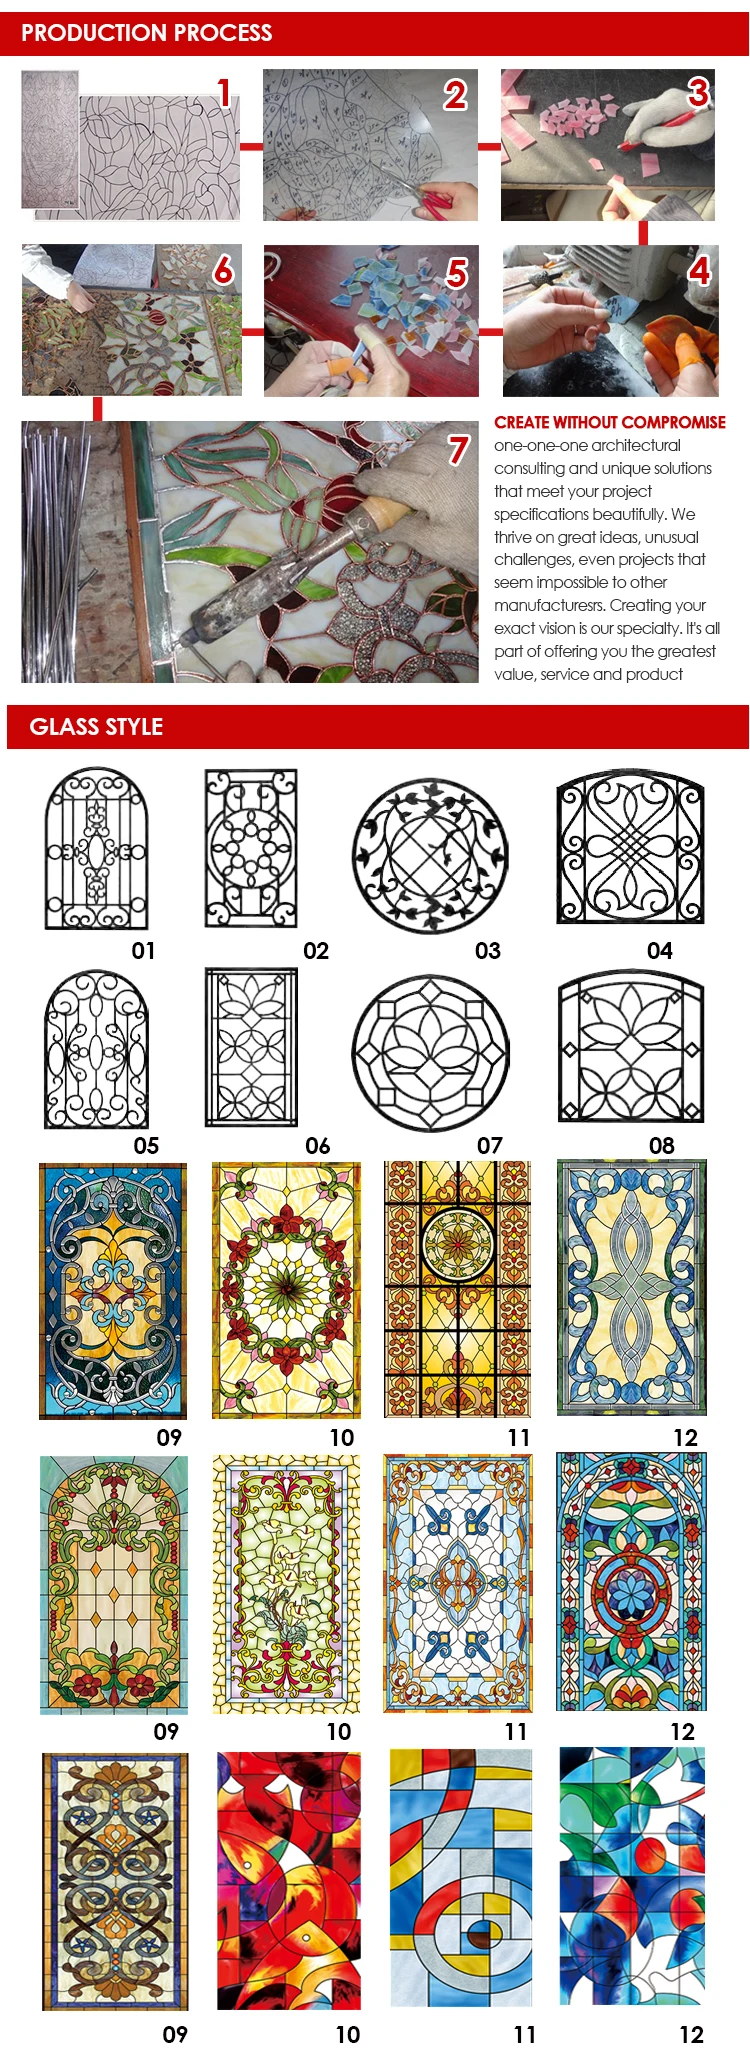 Manufactory direct pictures of stained glass windows